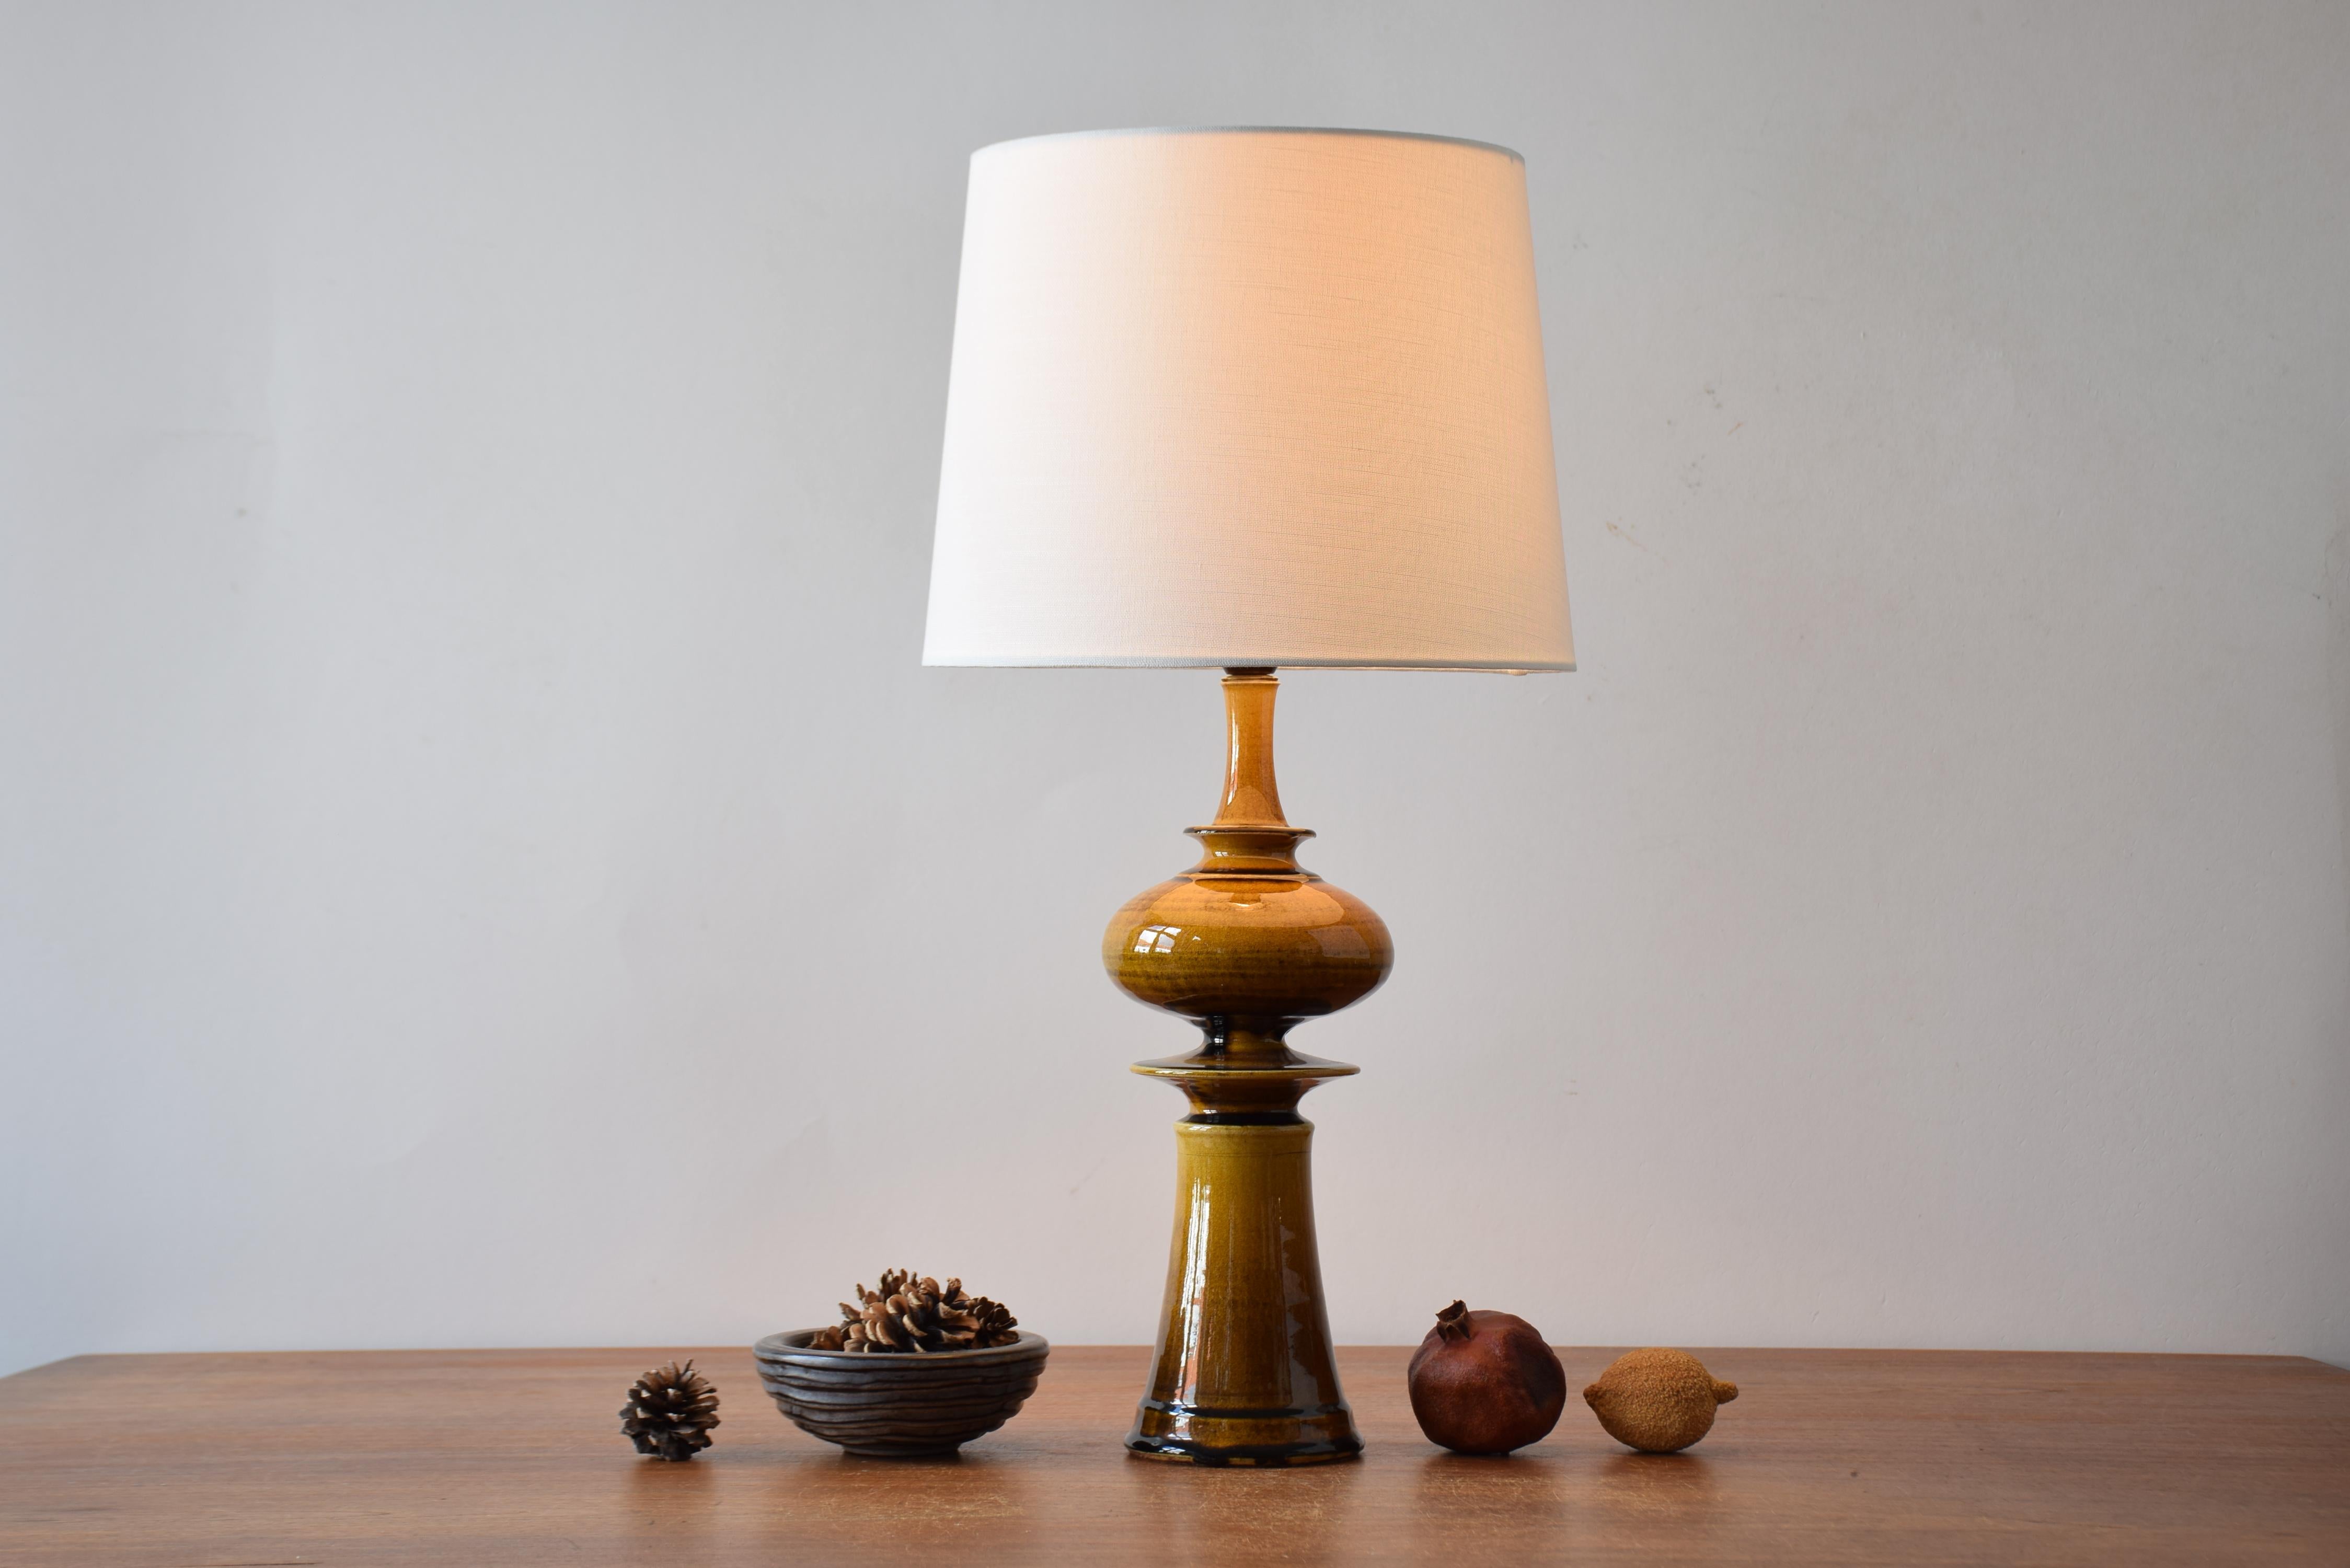 Sculptural Mid-century Danish table lamp from the ceramic studio Kähler (HAK). The lamp was designed by Poul Erik Eliasen and manufactured ca. 1960s or early 1970s.

The lamp is made of stoneware and has a glossy amber yellow glaze. The ceramic part